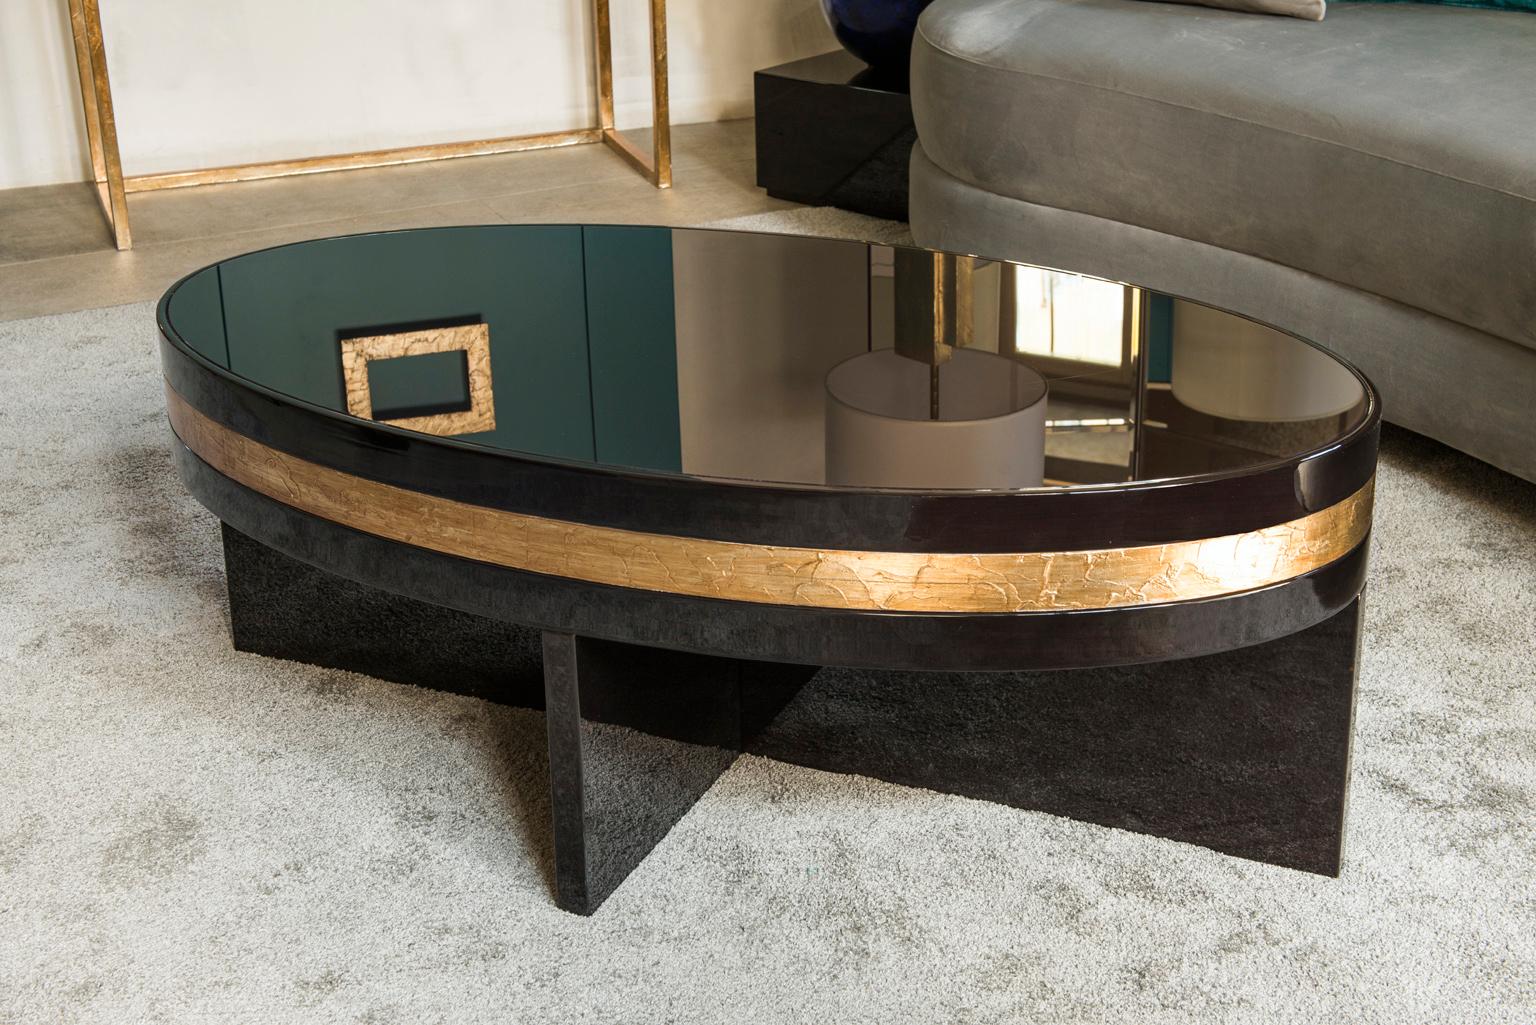 Designed by IC and skilfully crafted by expert Italian artisans, the Tullia coffee table features an oval glass top laying on a wood crossed base. It is enriched by a precious, elegant, bronze and silver leaf decoration: a stunning piece unlike any